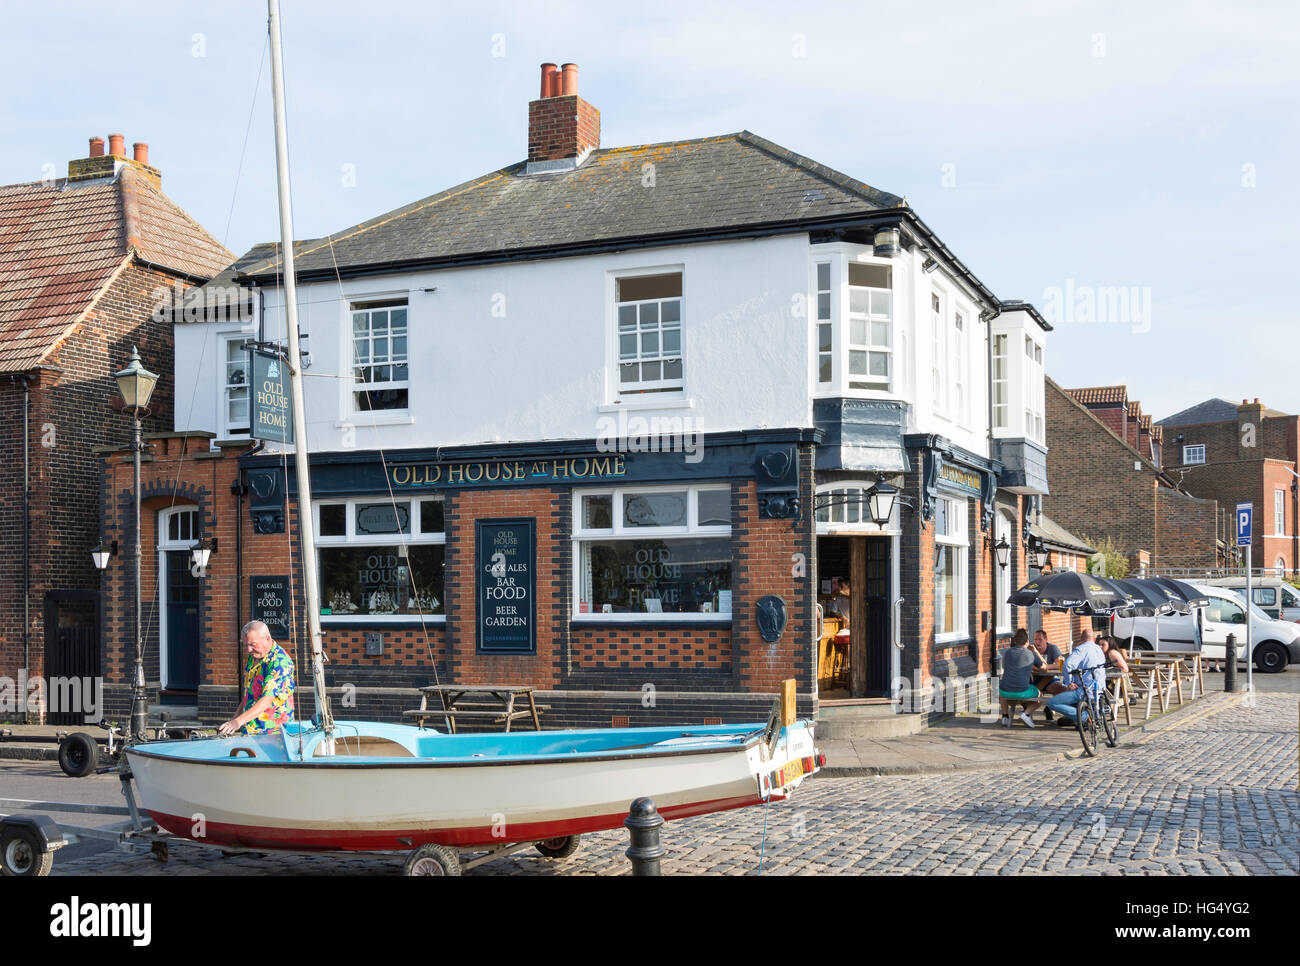 The Old House at Home Pub, High Street, Queenborough, Isle of Sheppey, Kent, England, United Kingdom Stock Photo